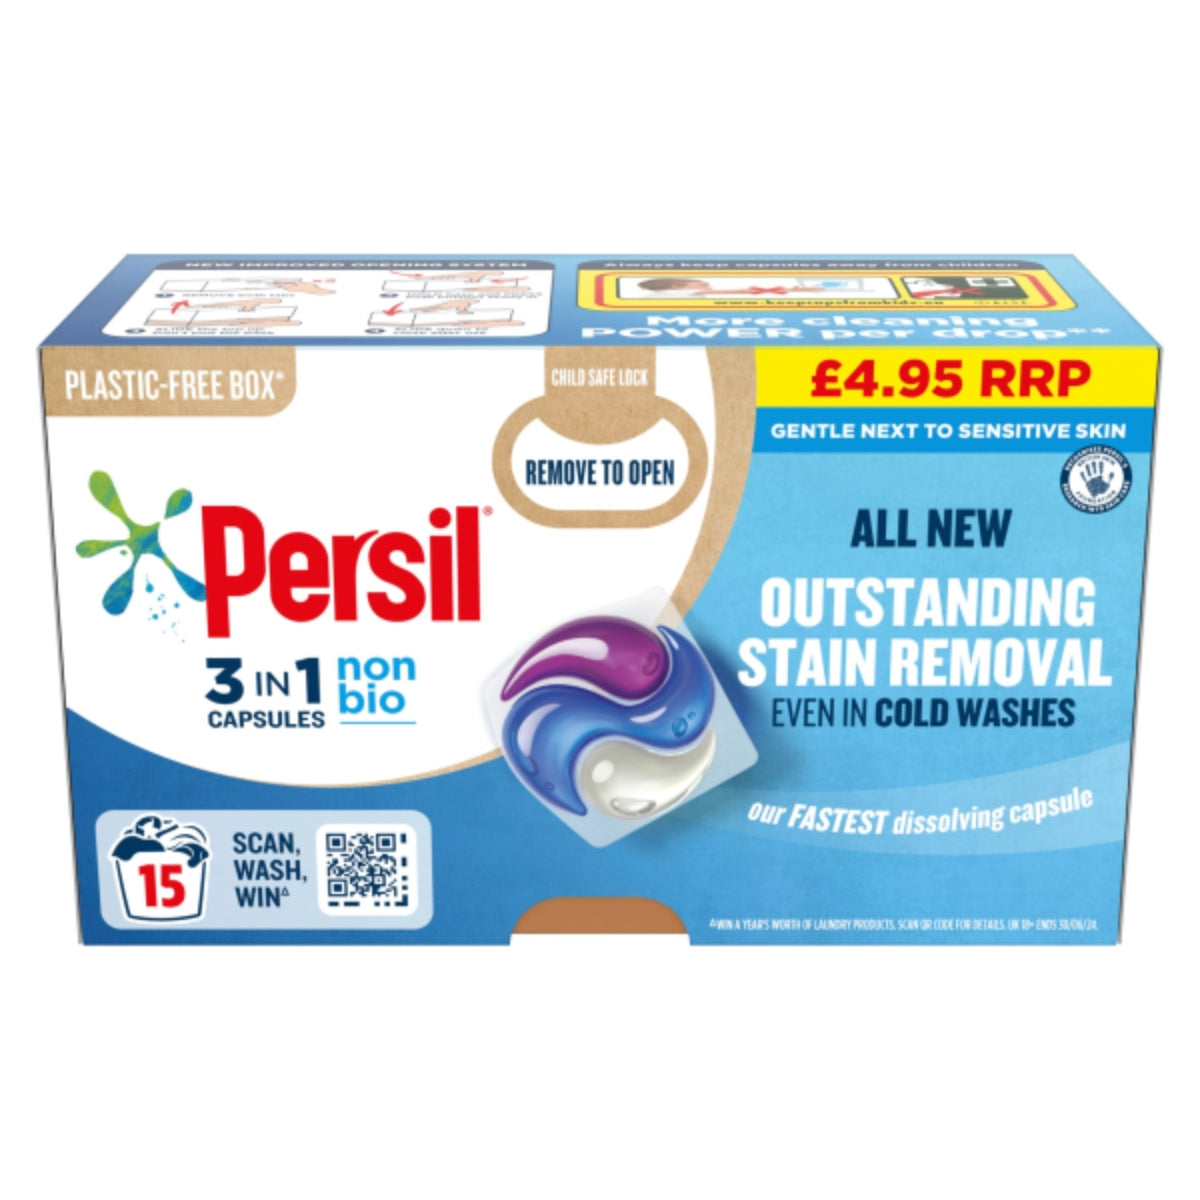 A box of Persil - 3 in 1 Washing Capsules Non Bio - 15 Washes.